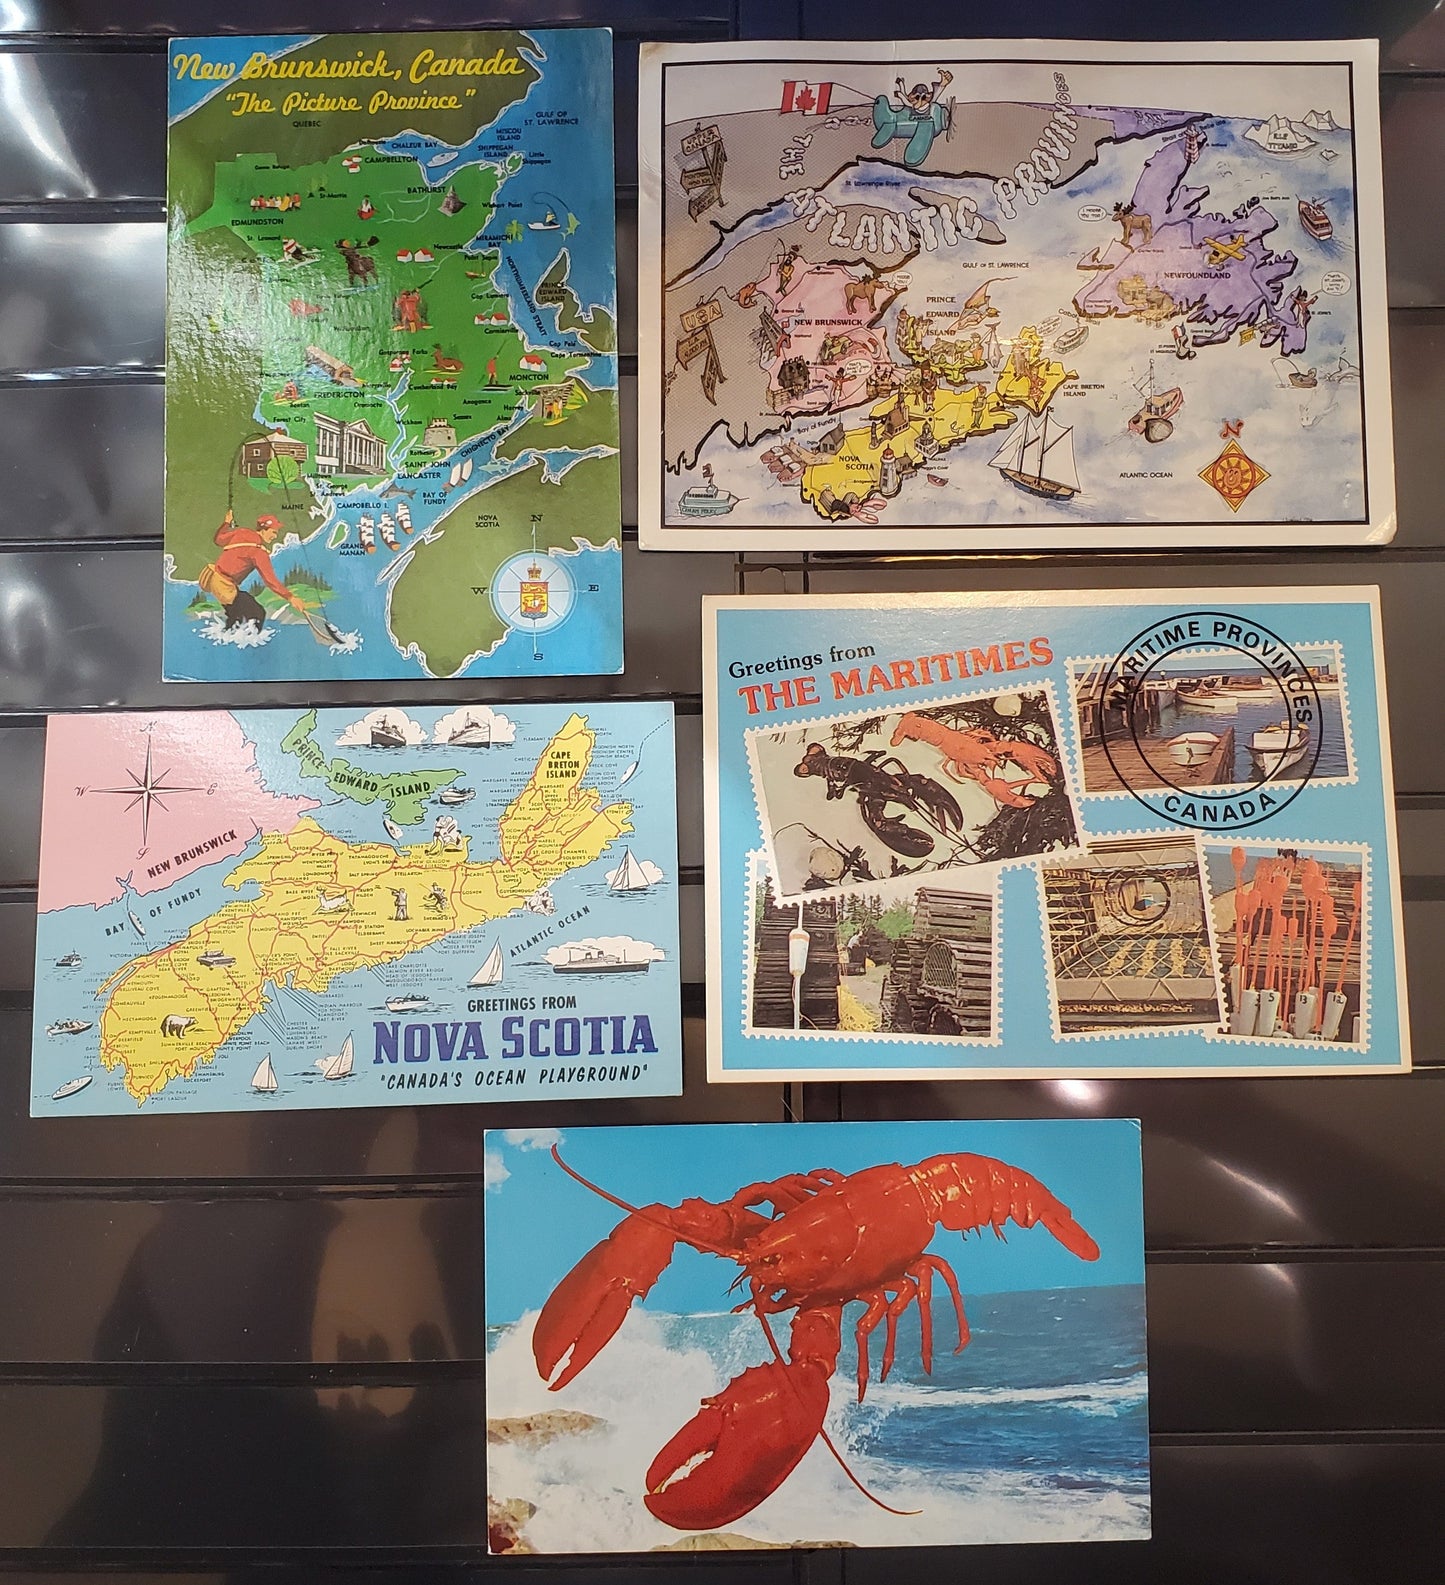 A Group of 4 Postcards From The Maritimes, Showing Maps and Tourism Themes, From The 1970's-1990's, Overall Fine and VF, Net Est. $2